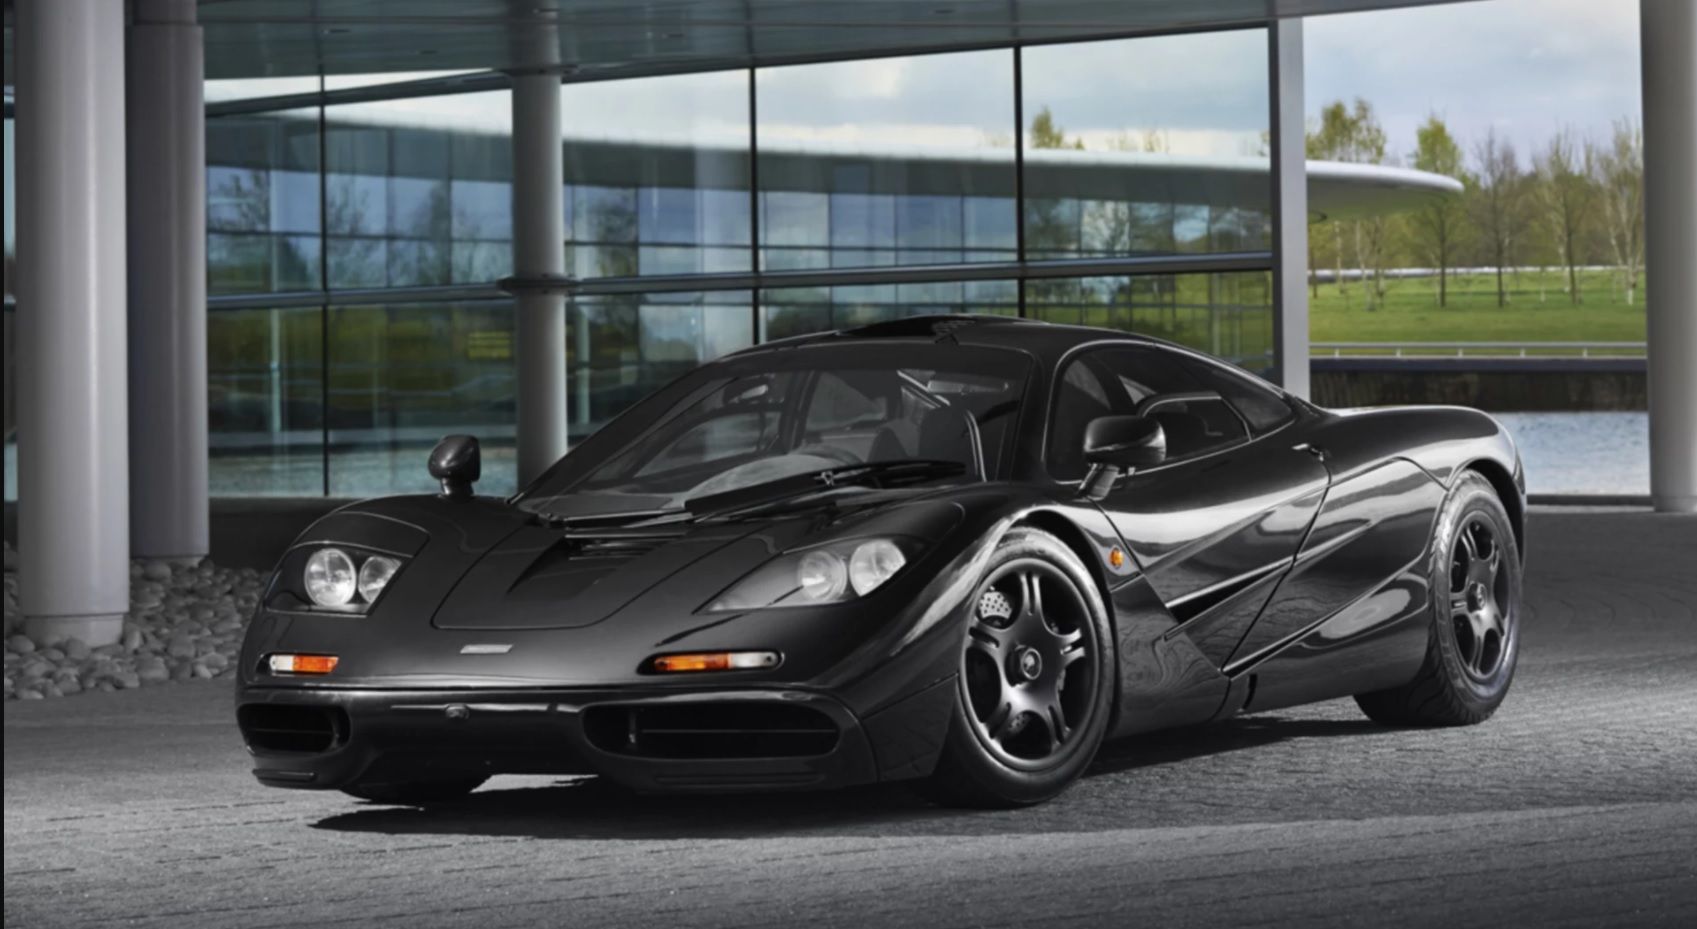 The black 1997 McLaren F1 parked outside. 